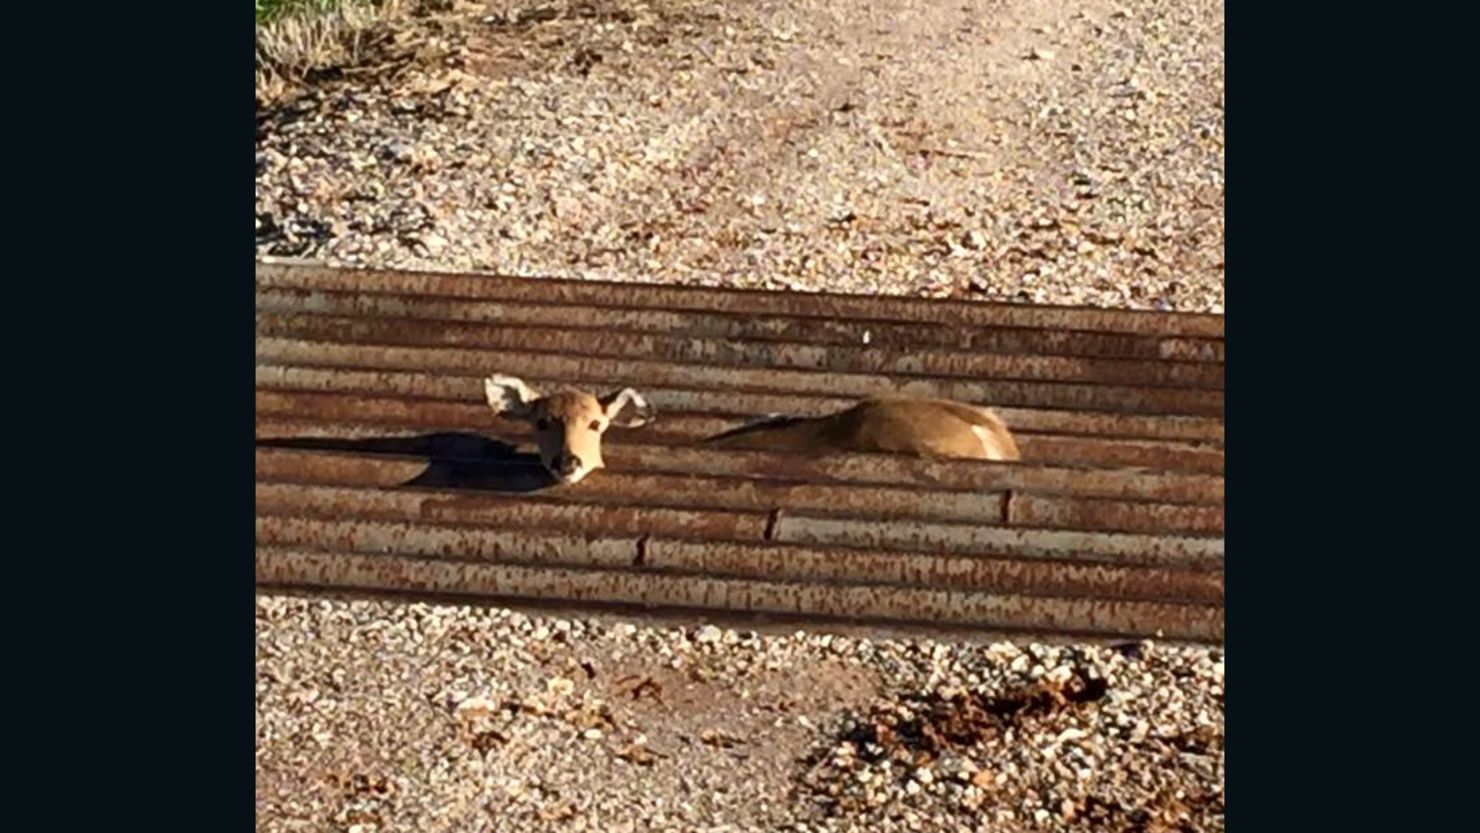 Fawn trapped in cattle guard in Oklahoma.